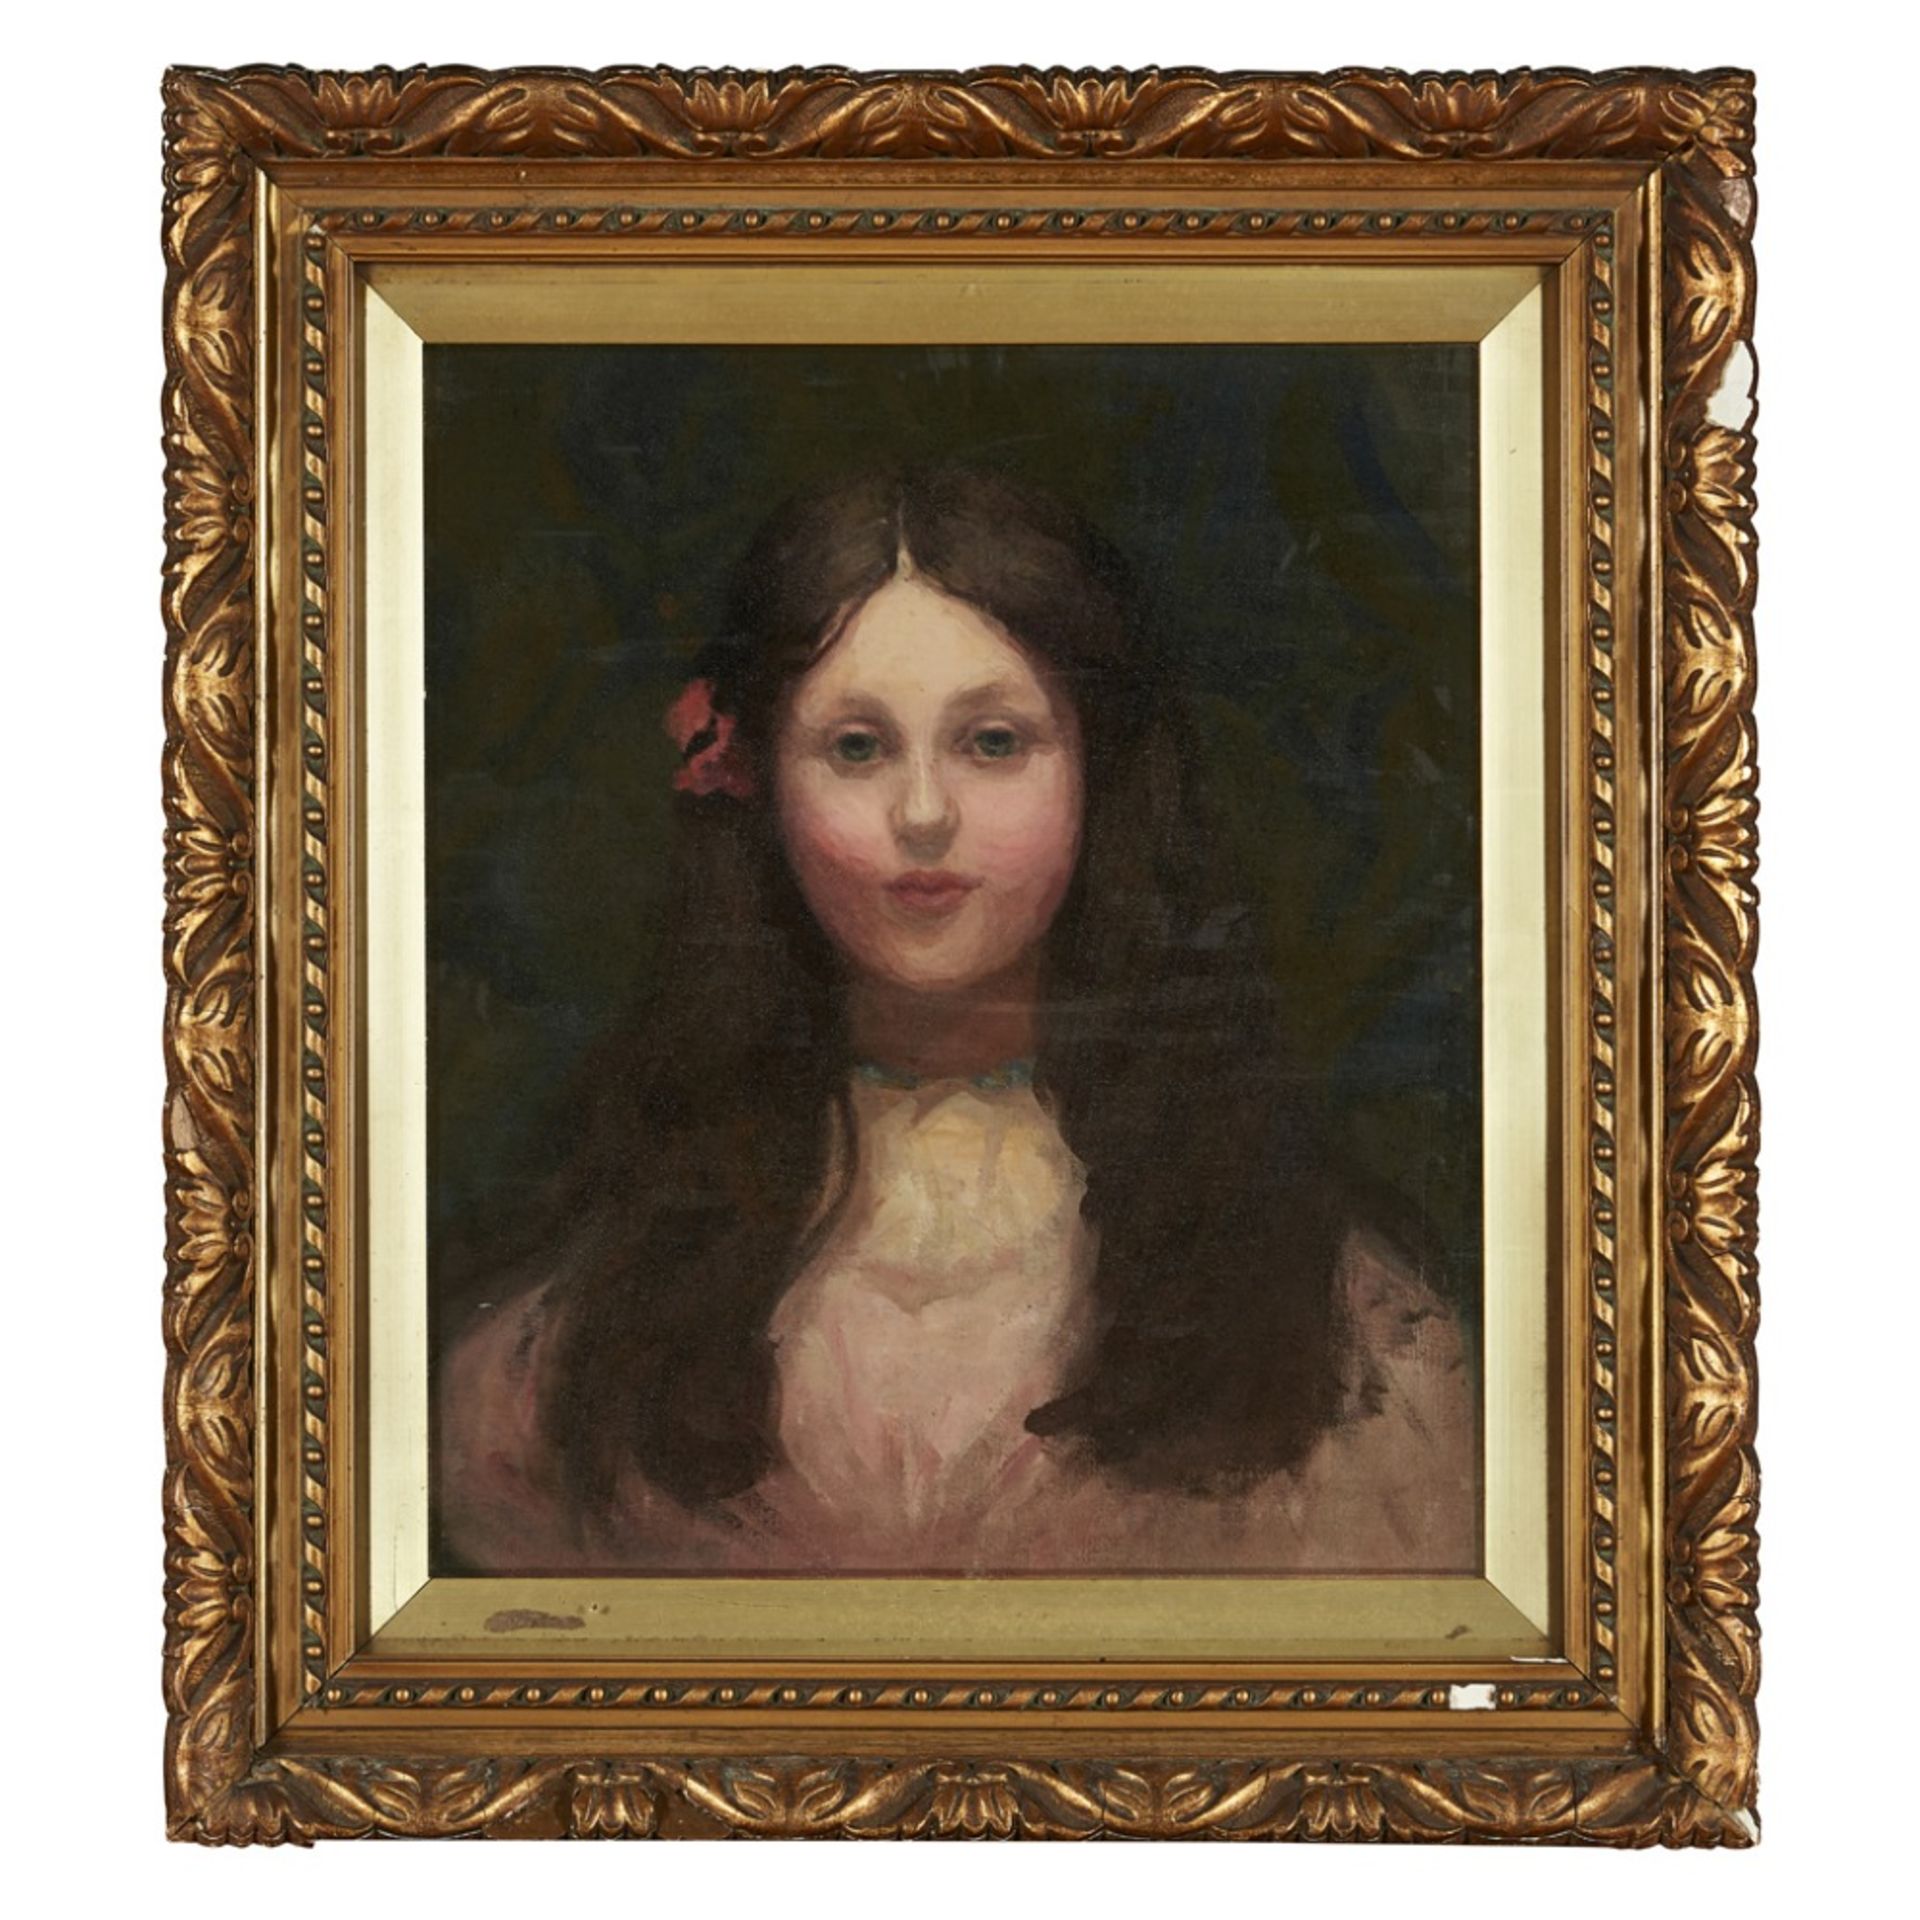 ATTRIBUTED TO DAVID GAULDPORTRAIT OF A GIRL Oil on canvas51cm x 44cm (20in x 17.5in) - Image 2 of 2